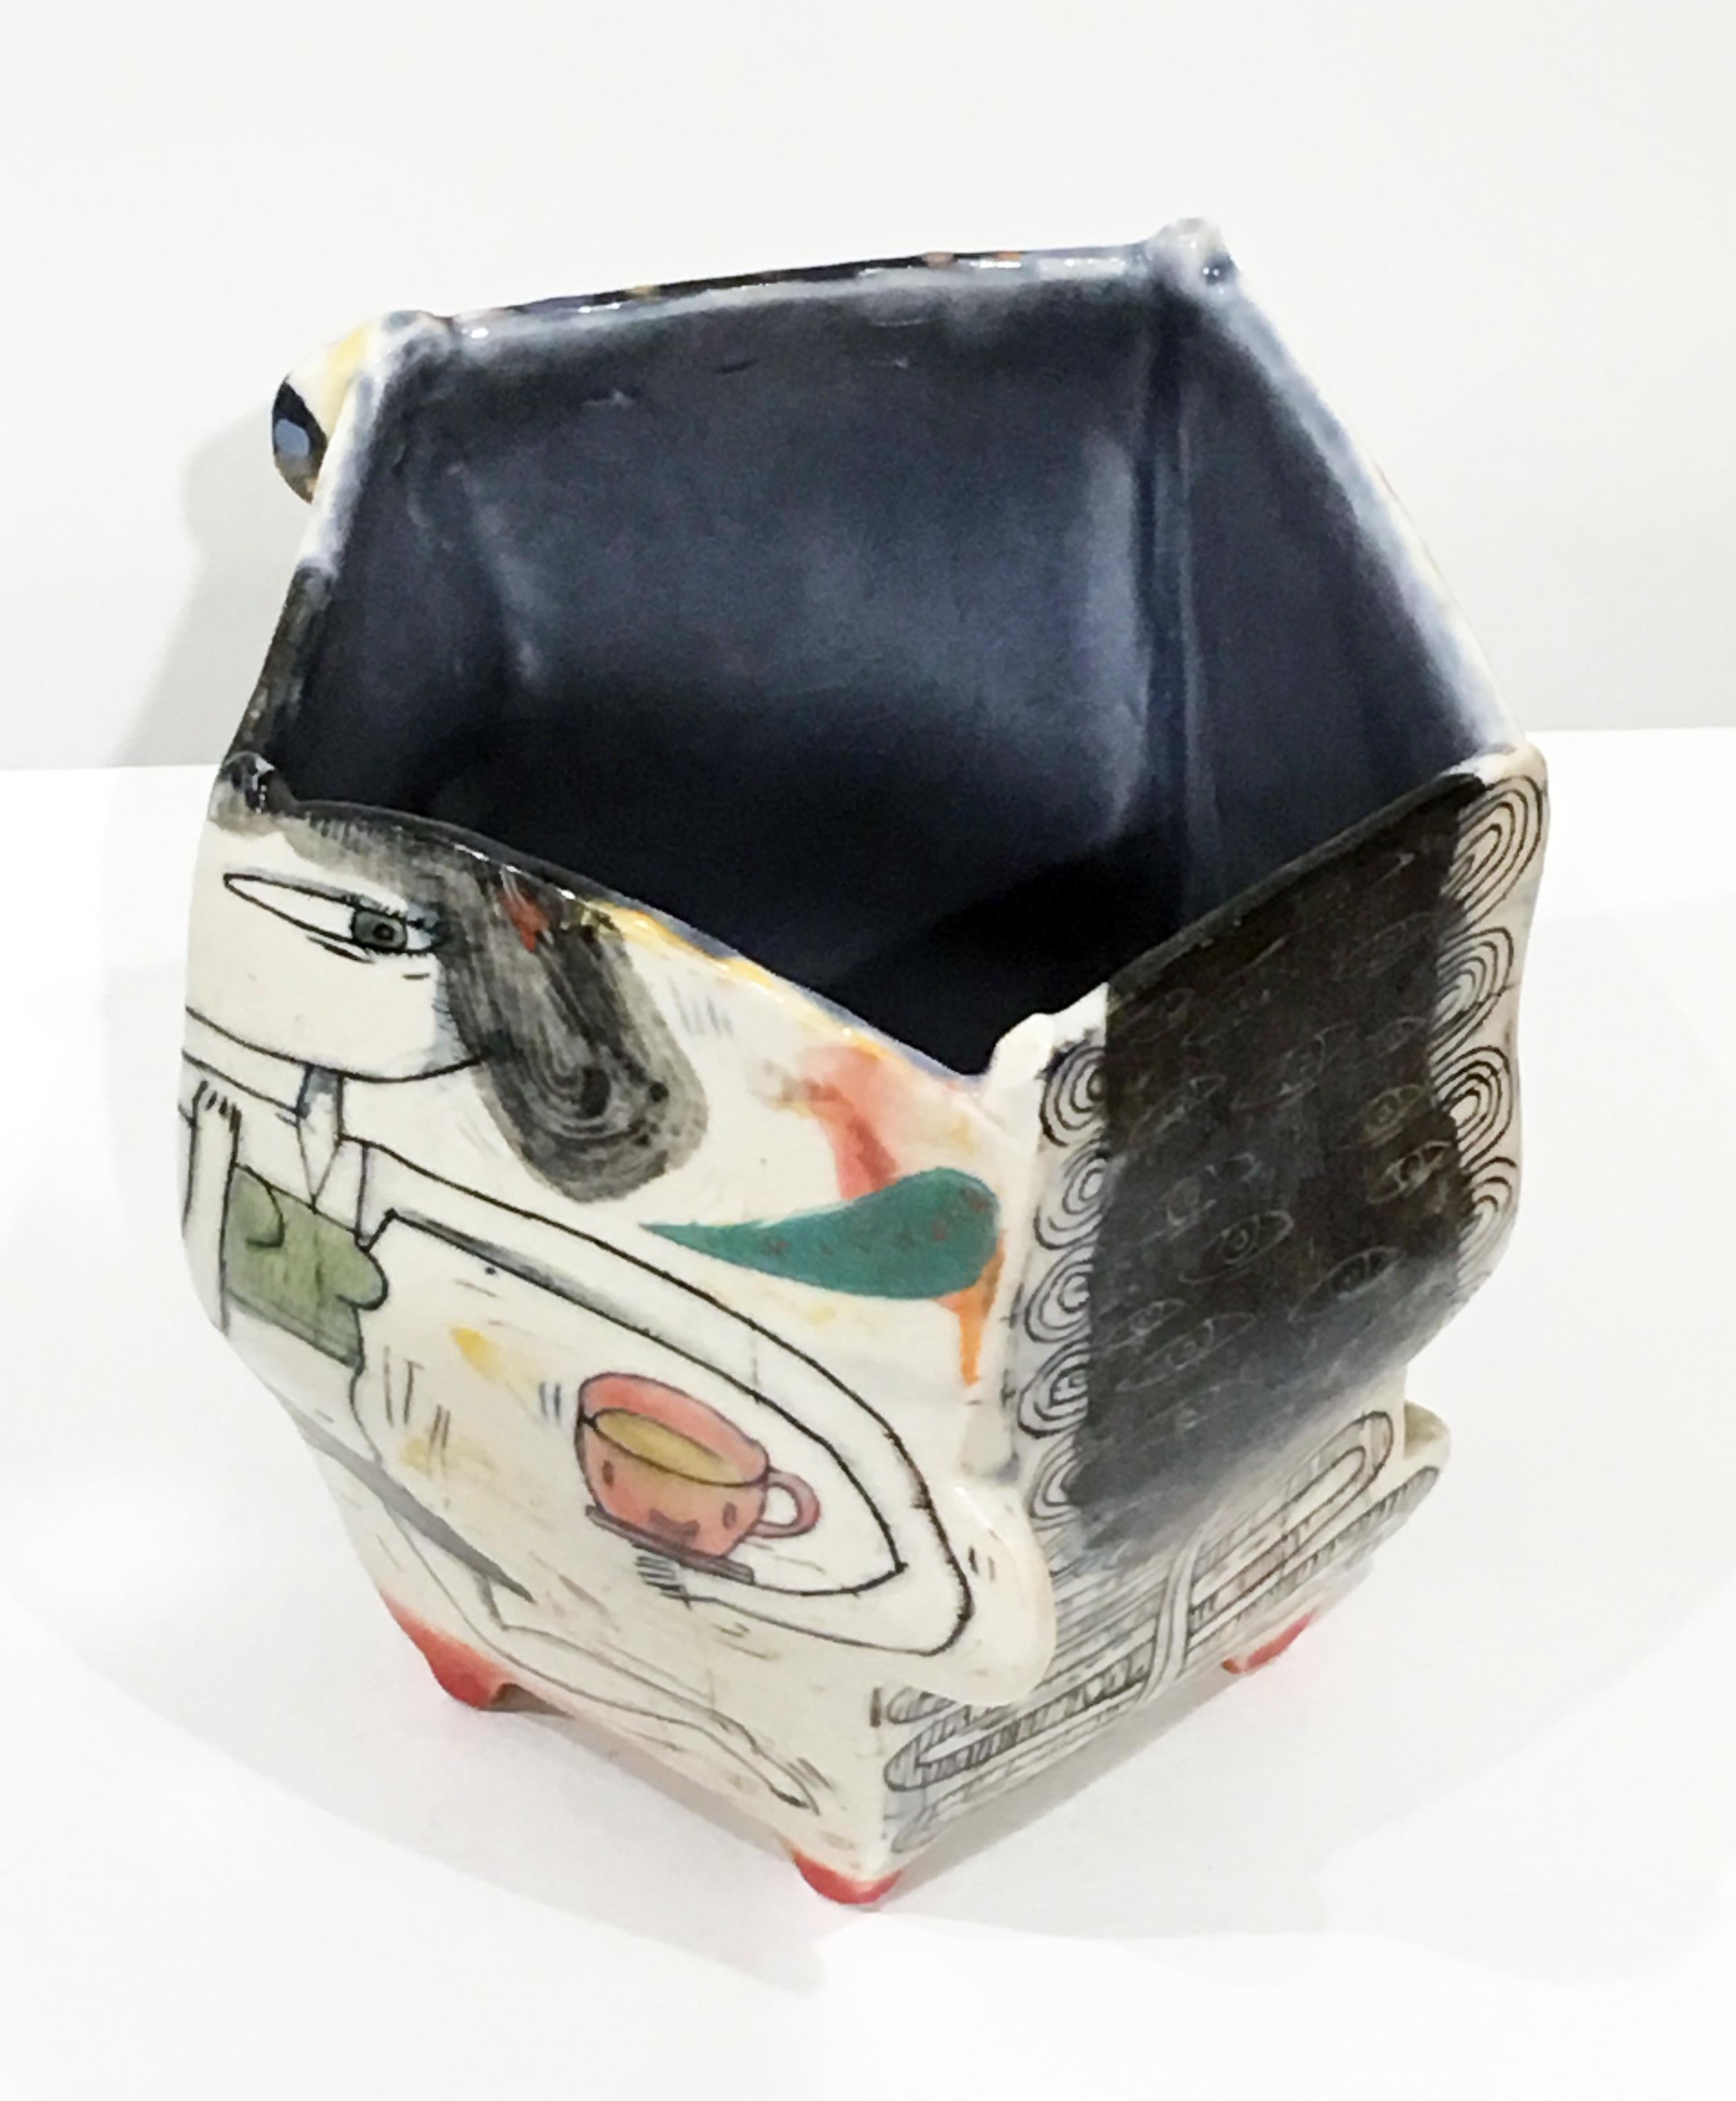 Kevin Snipes creates ceramic vessel forms that act as canvases for self referential narratives that are brought to the viewer through a combination of illustration and symbolism, obscure glyphs, and comical/whimsical motifs. Within the discipline of